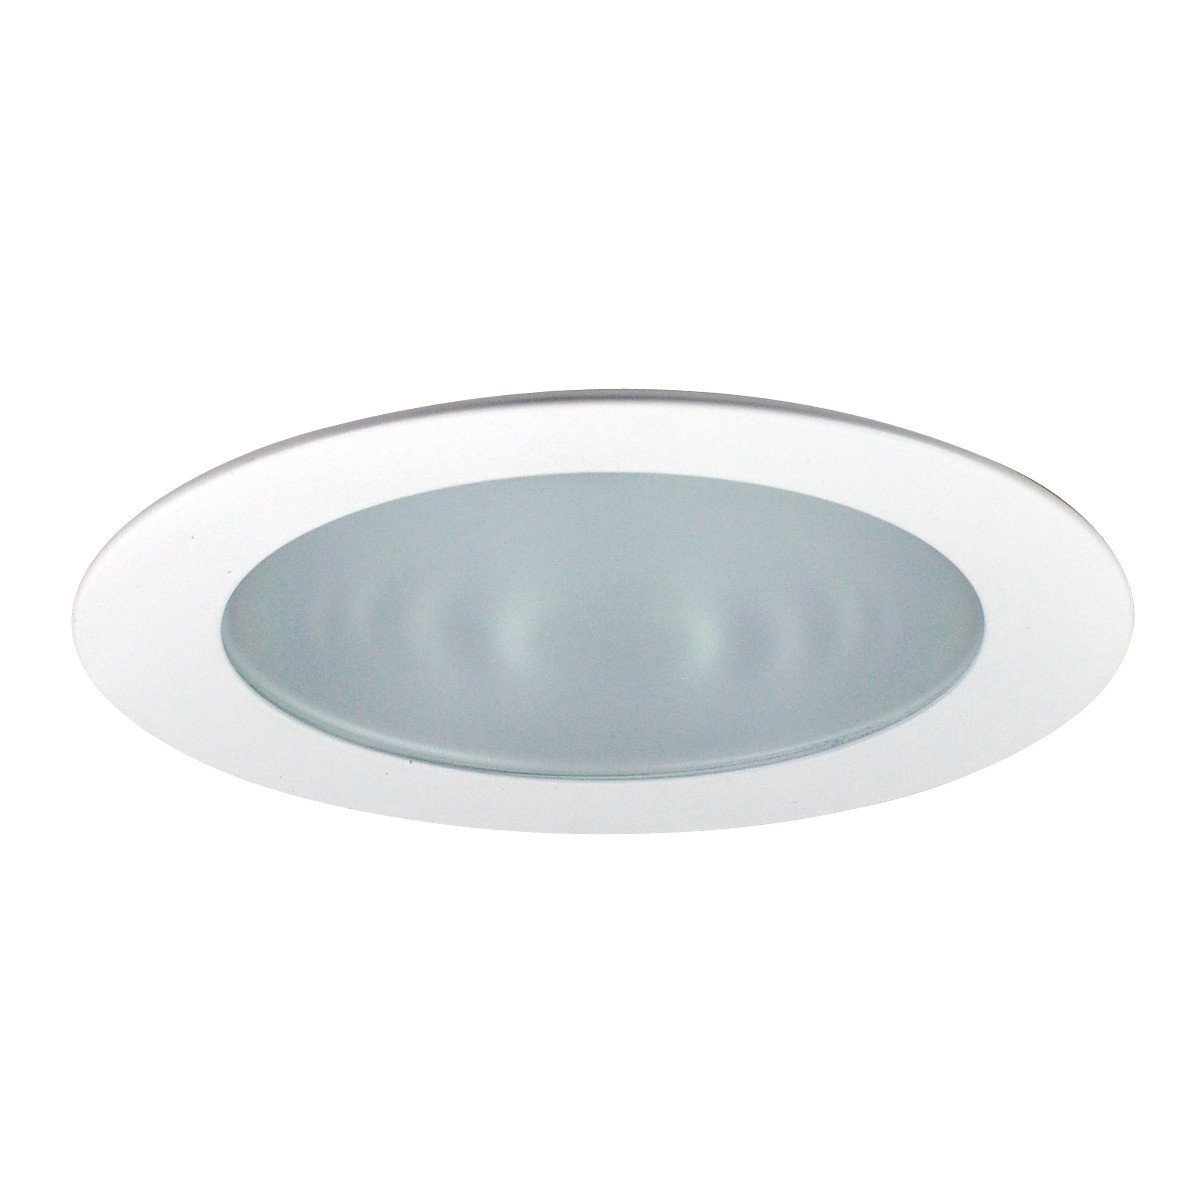 4" Recessed Trim - Frosted Flat Lens, Specular Clear Reflector, White Ring Recessed Nora Lighting White 